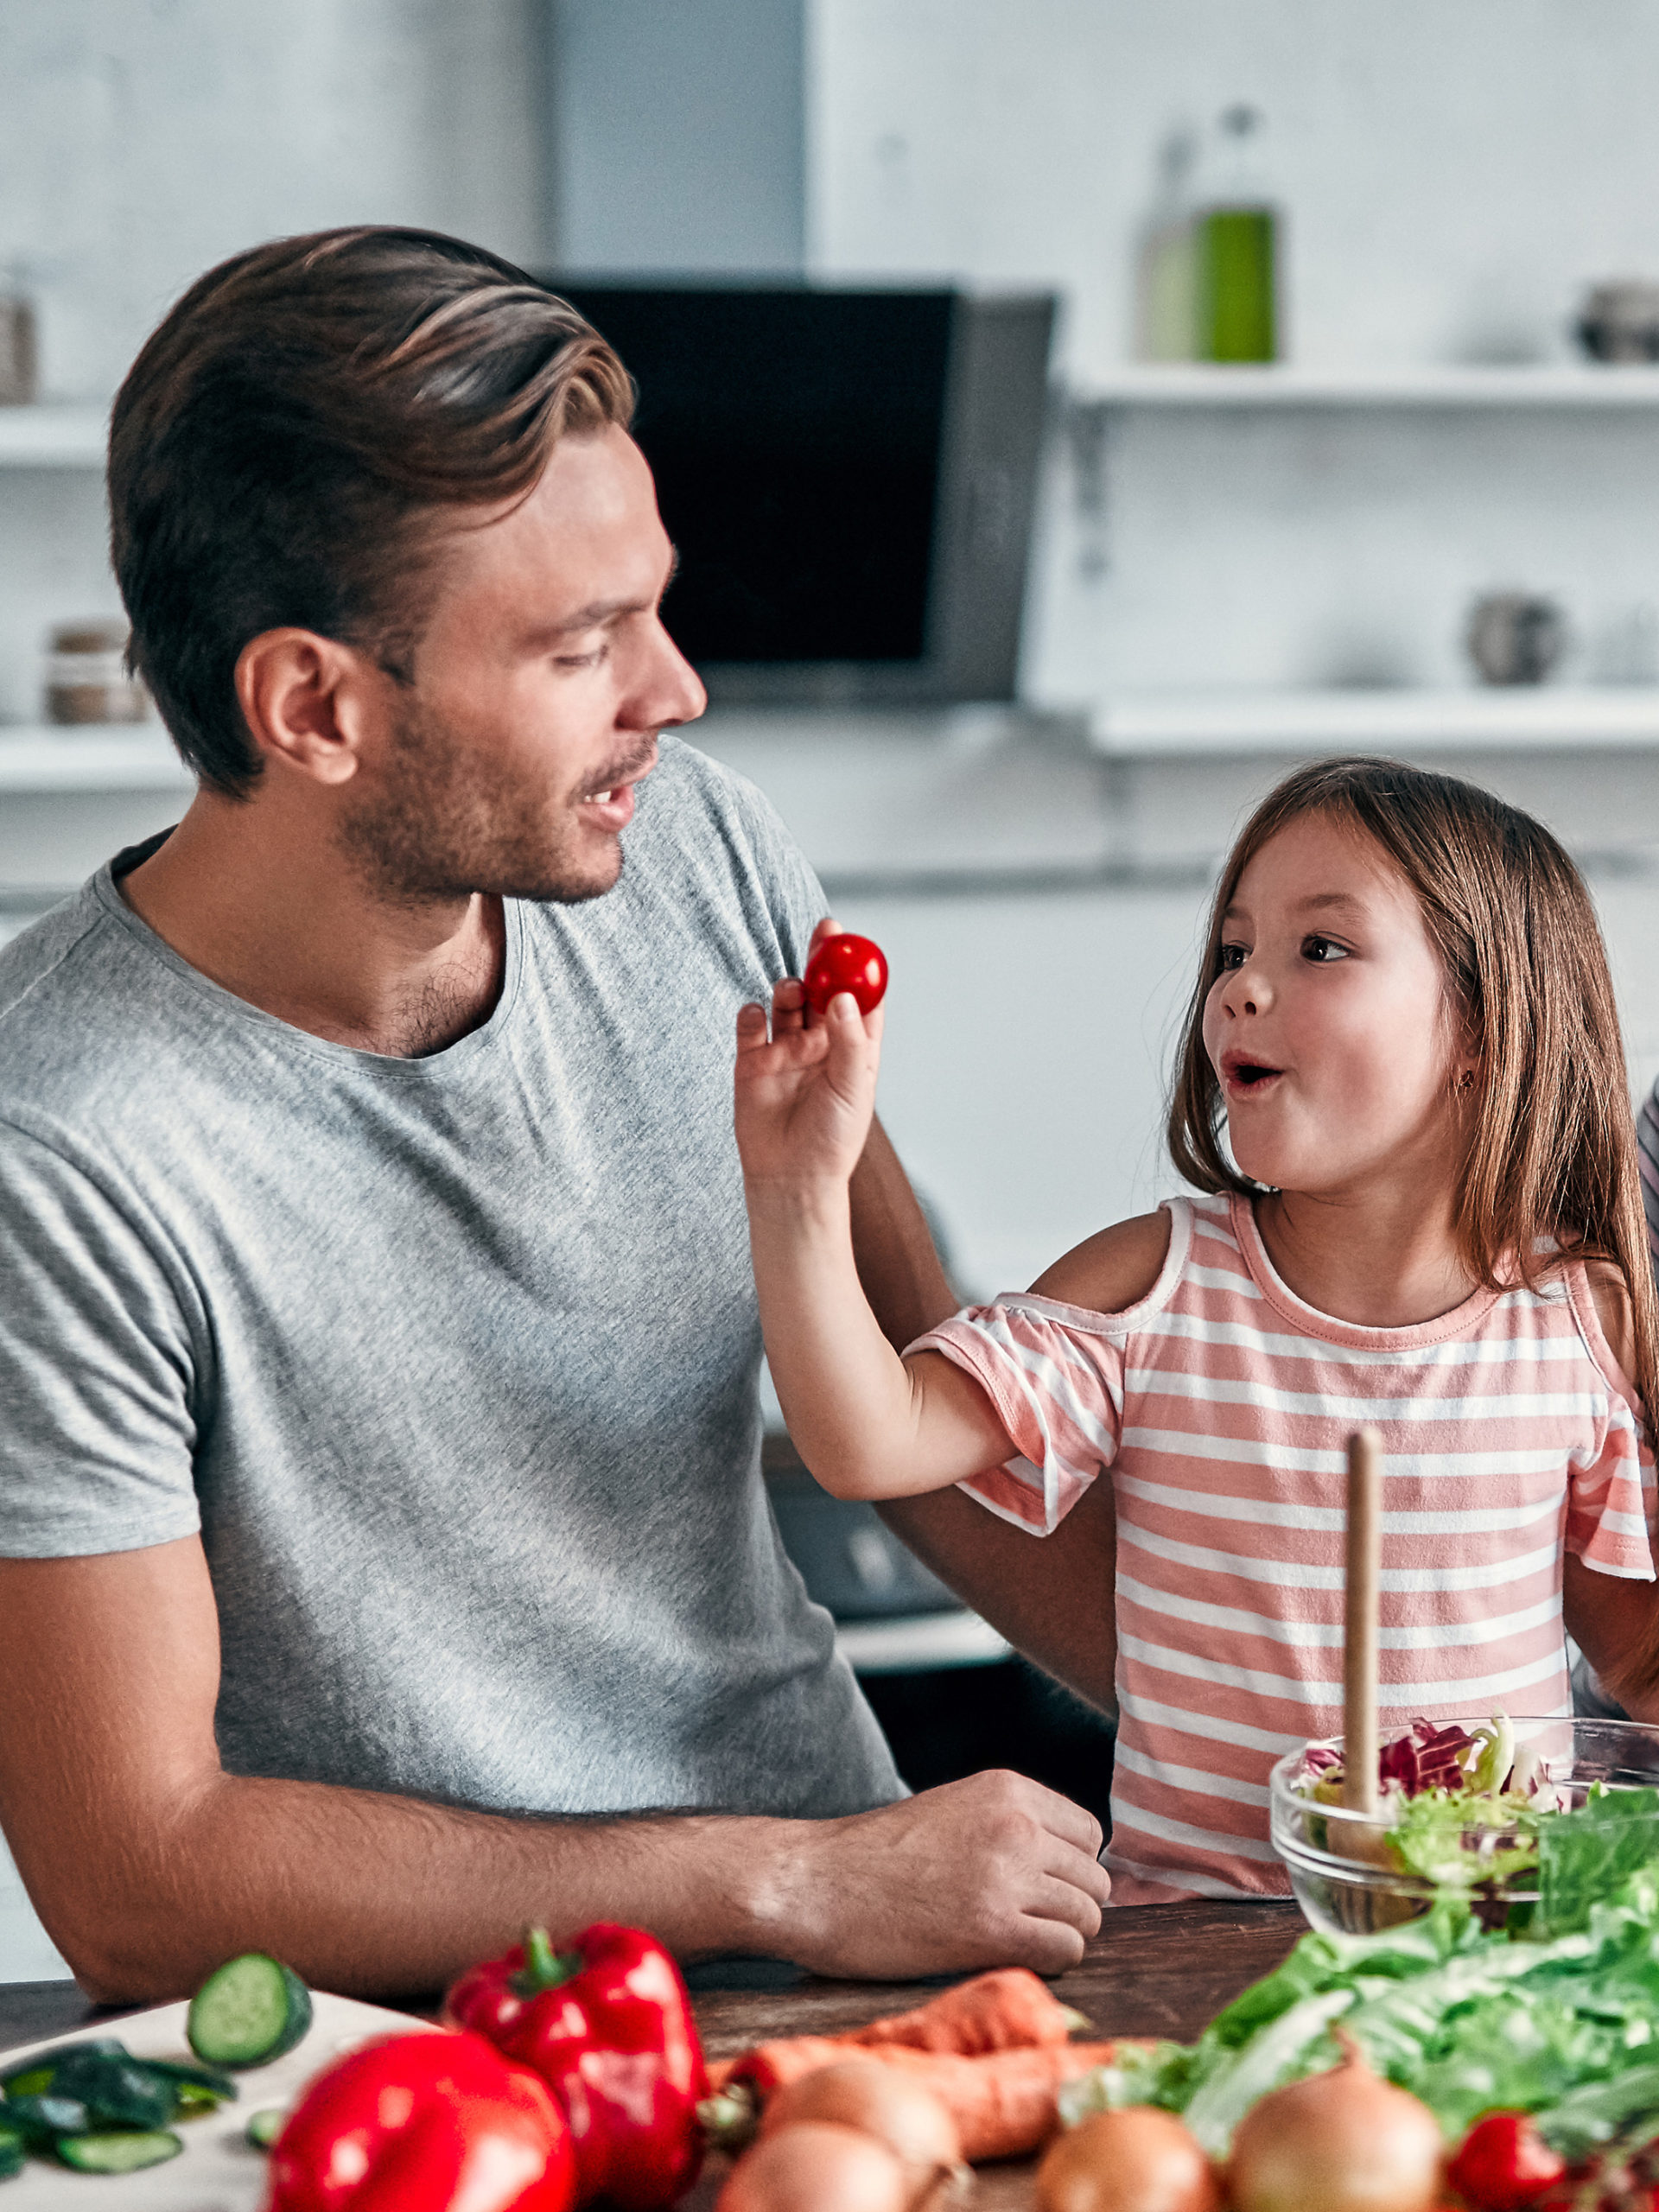 dad and daughter making salad together, little girl feeding dad a cherry tomato